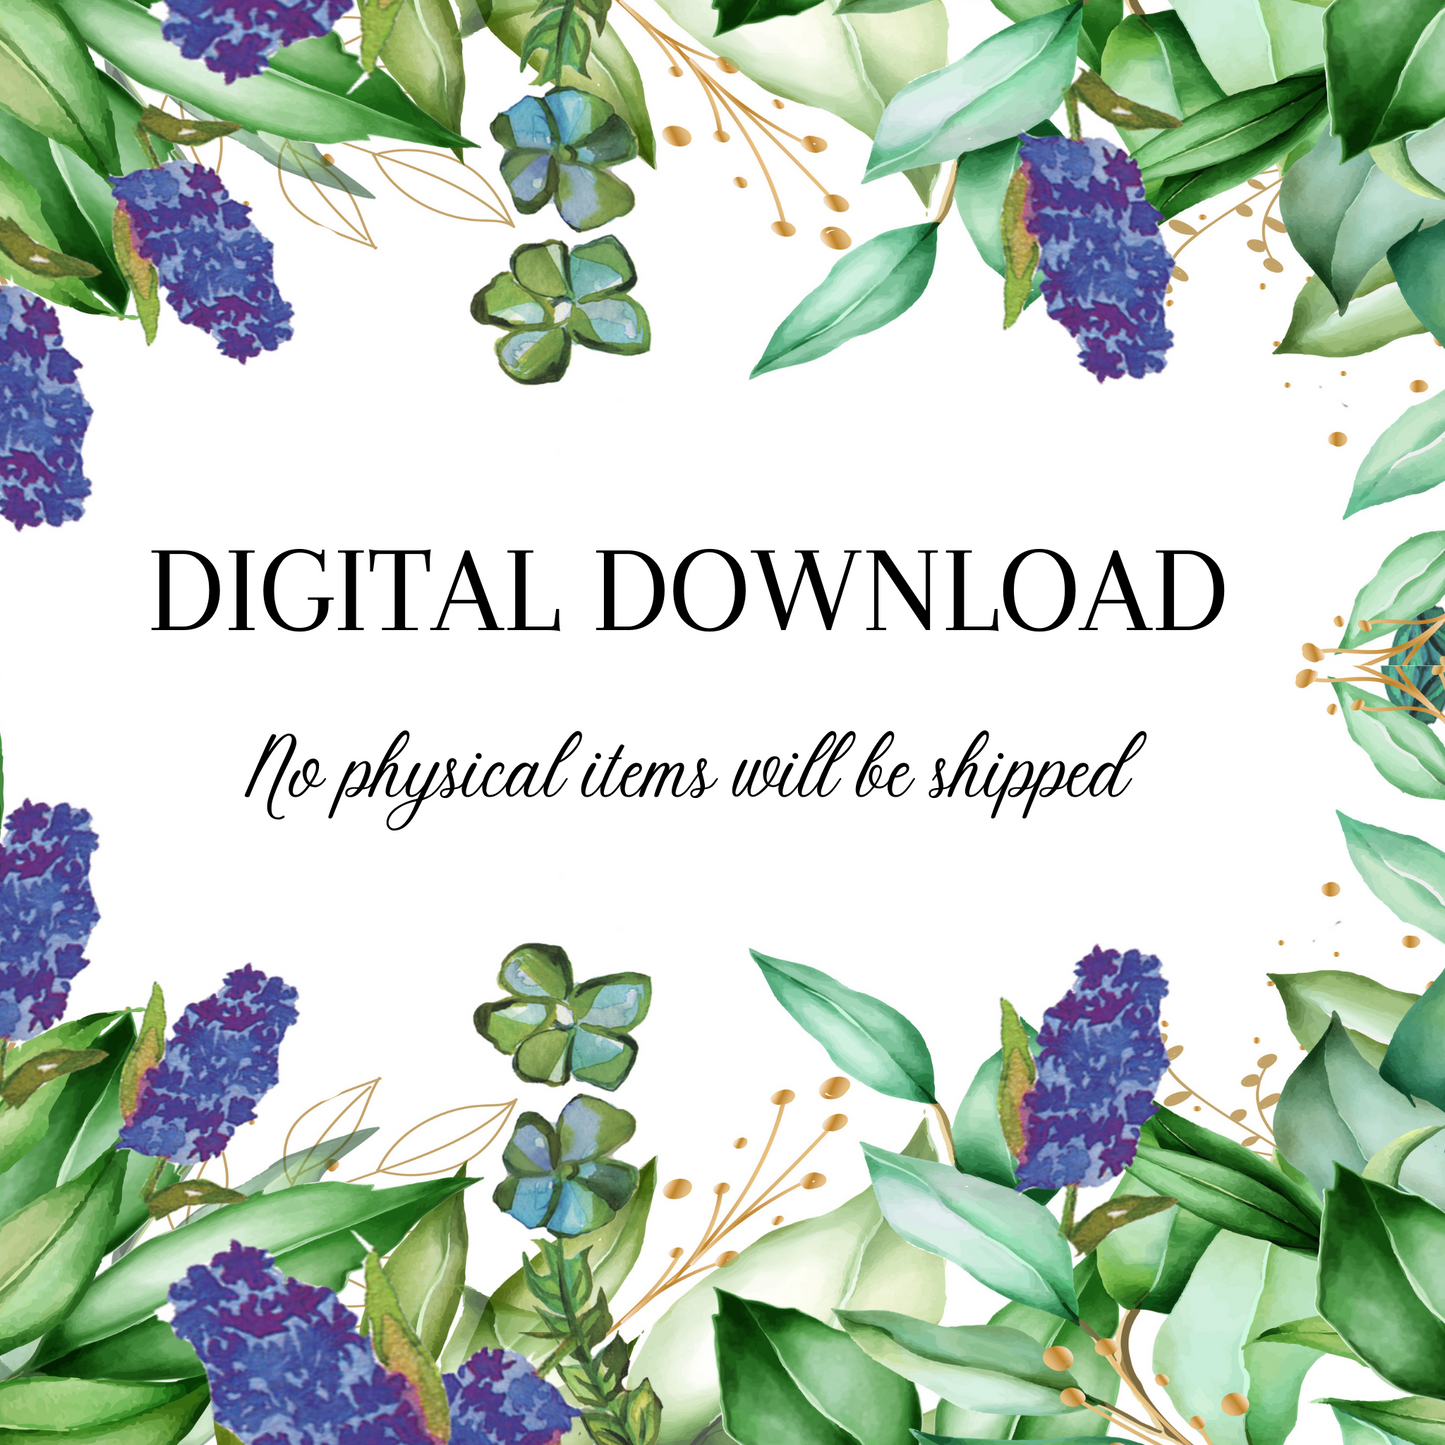 The announcement of the digital download